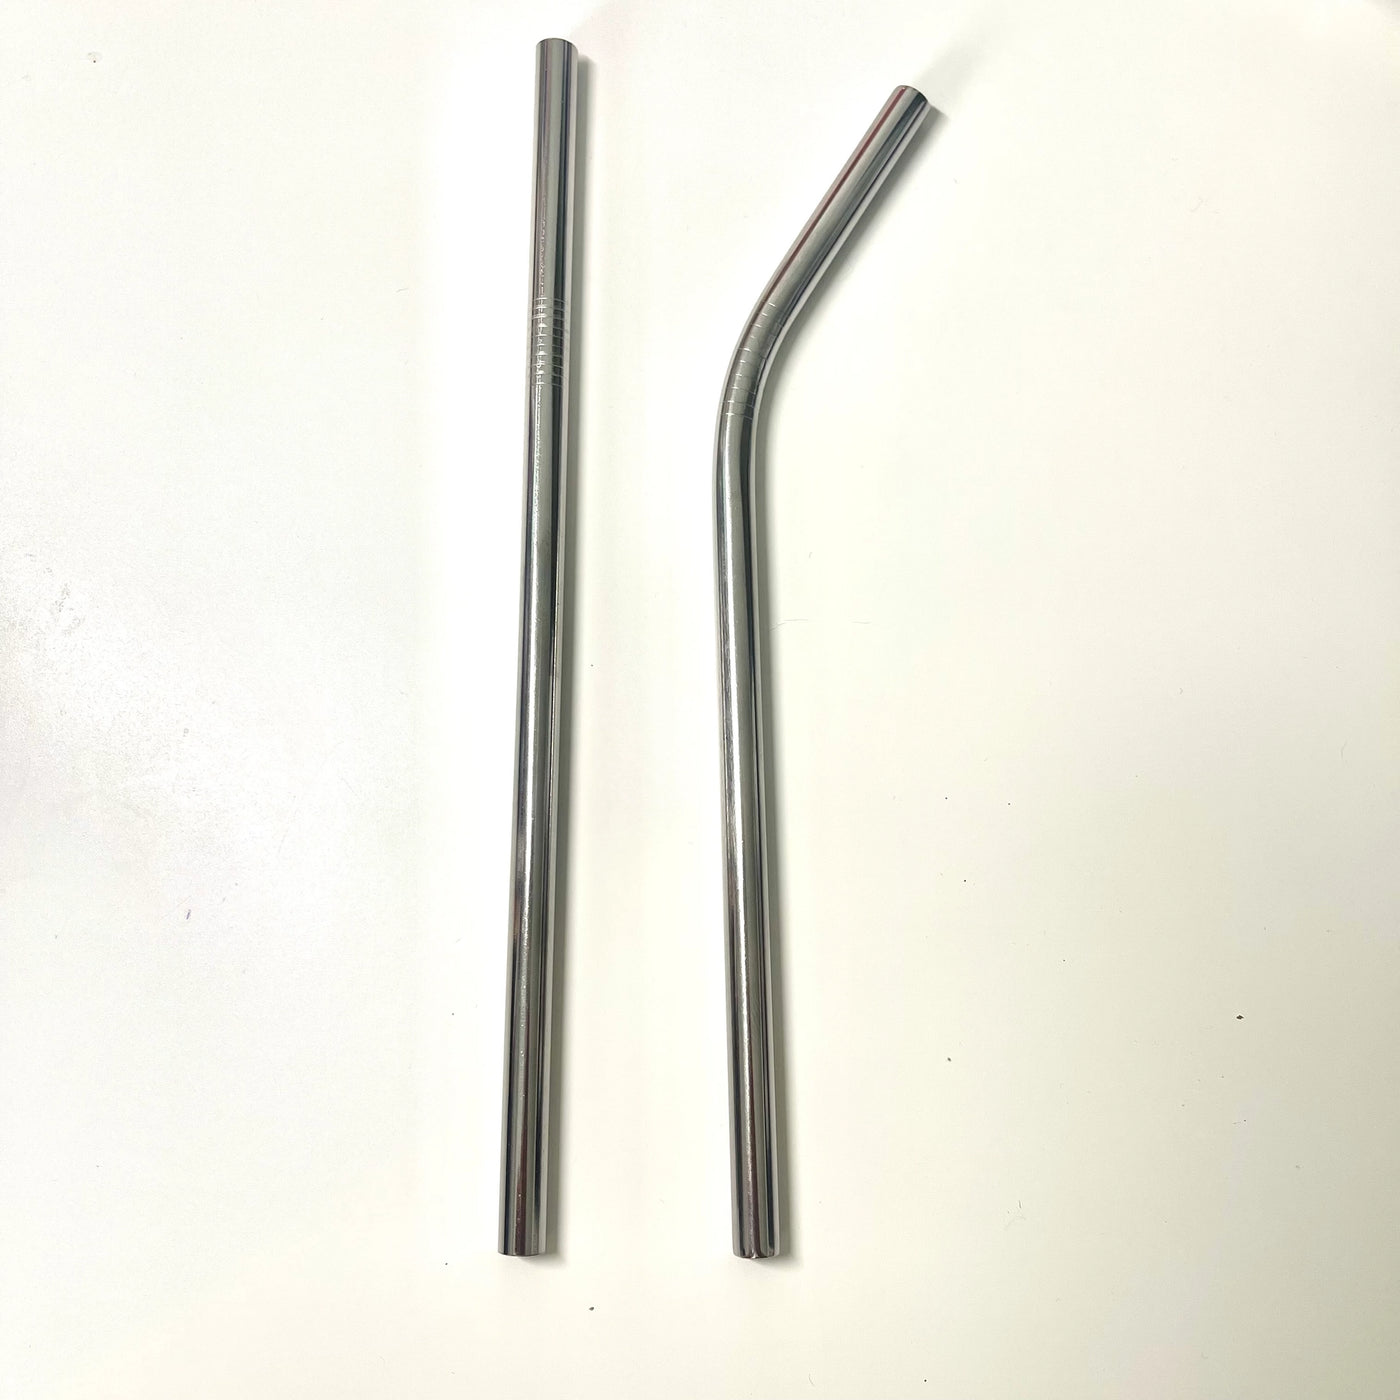 bent stainless steel straw